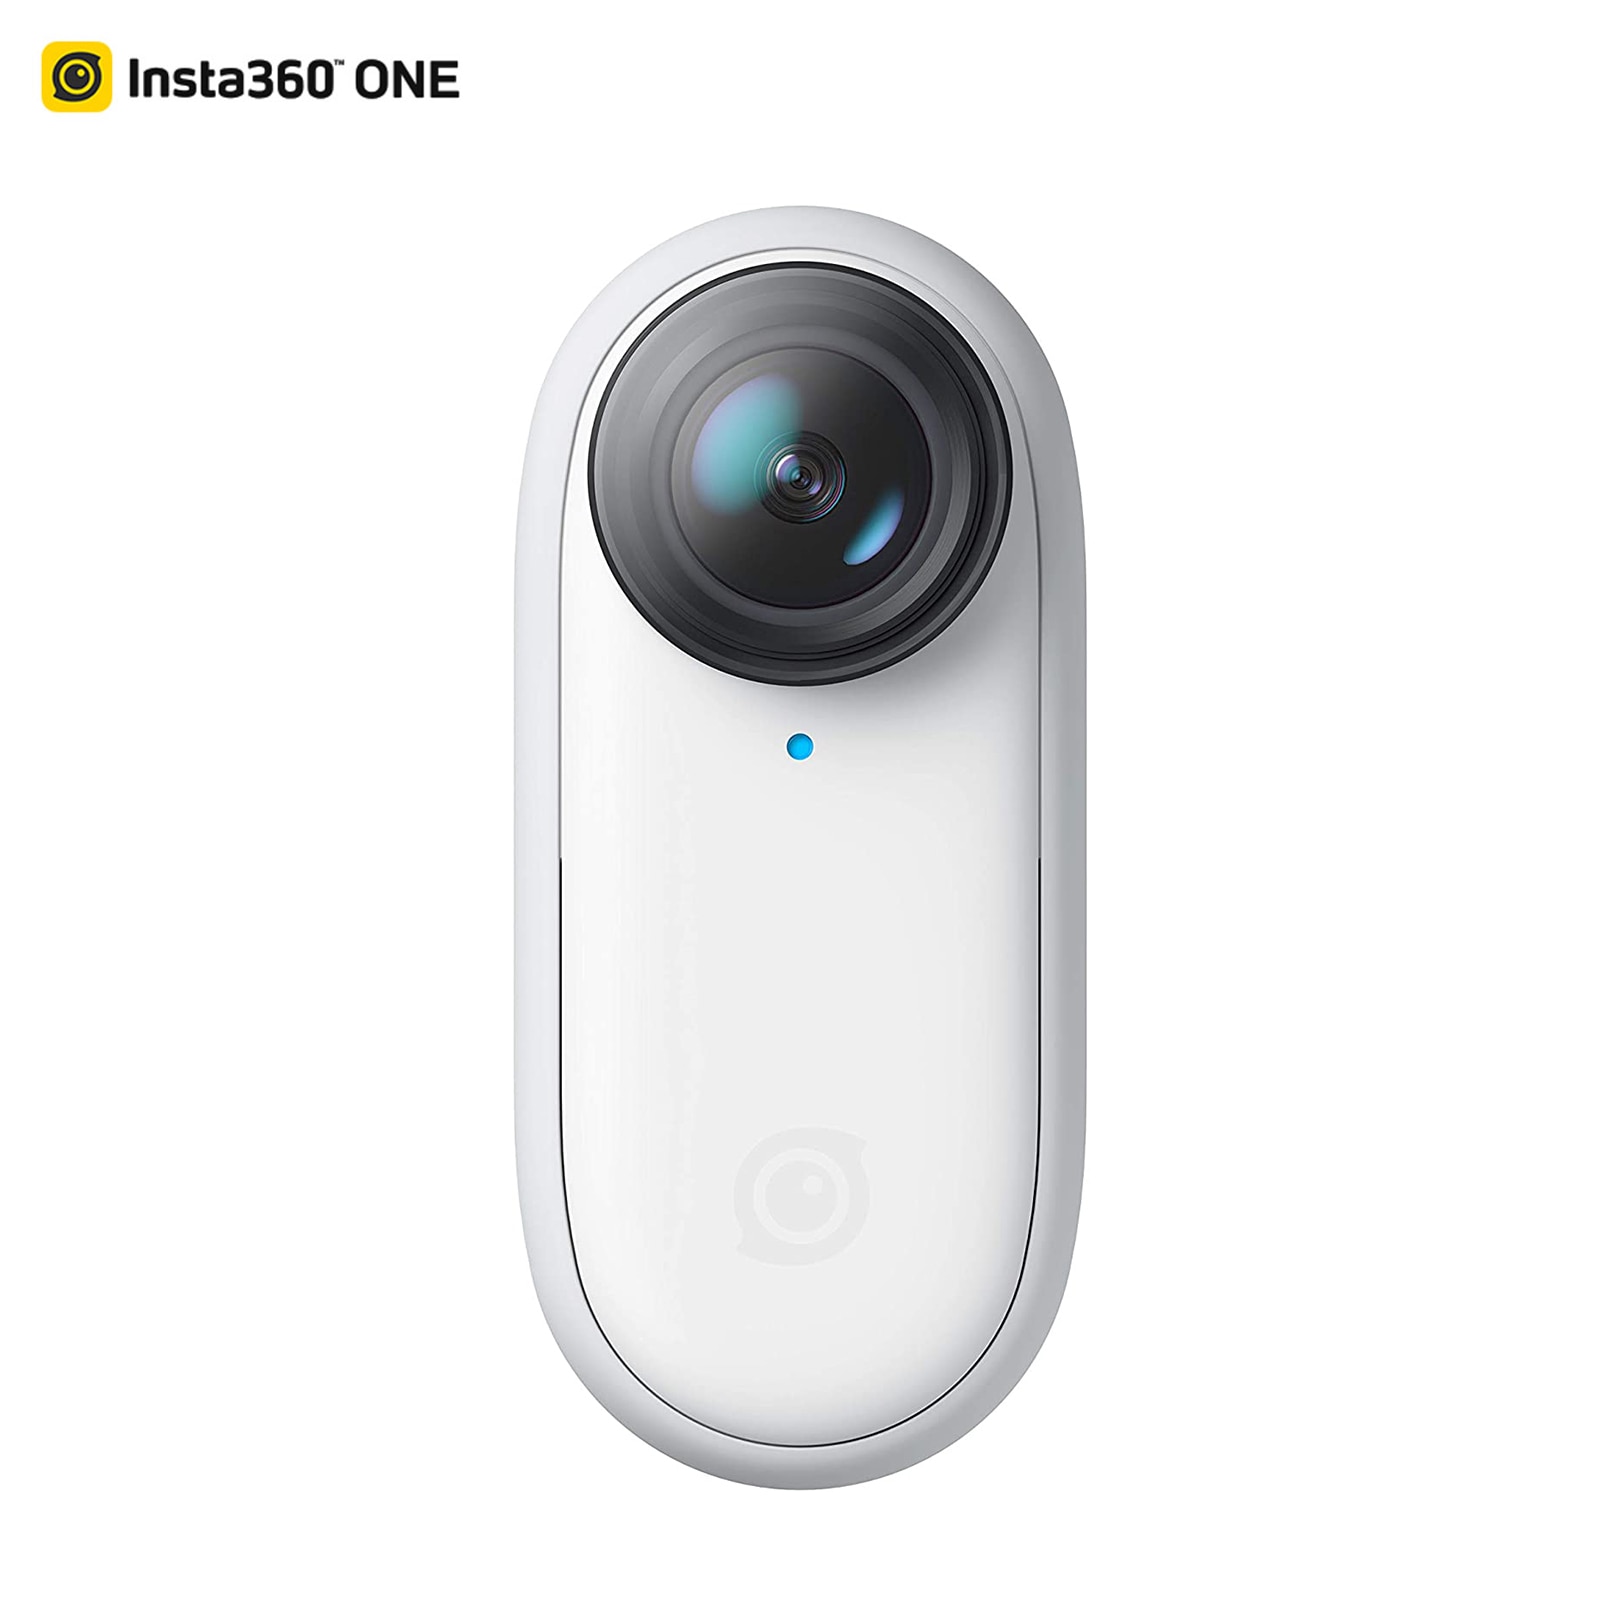 Insta360 Go 2 Tiny Mighty Action Camera 1440P 50fps Sports Camera IPX8 4M Waterproof FlowState Stabilization Remote Control WiFi